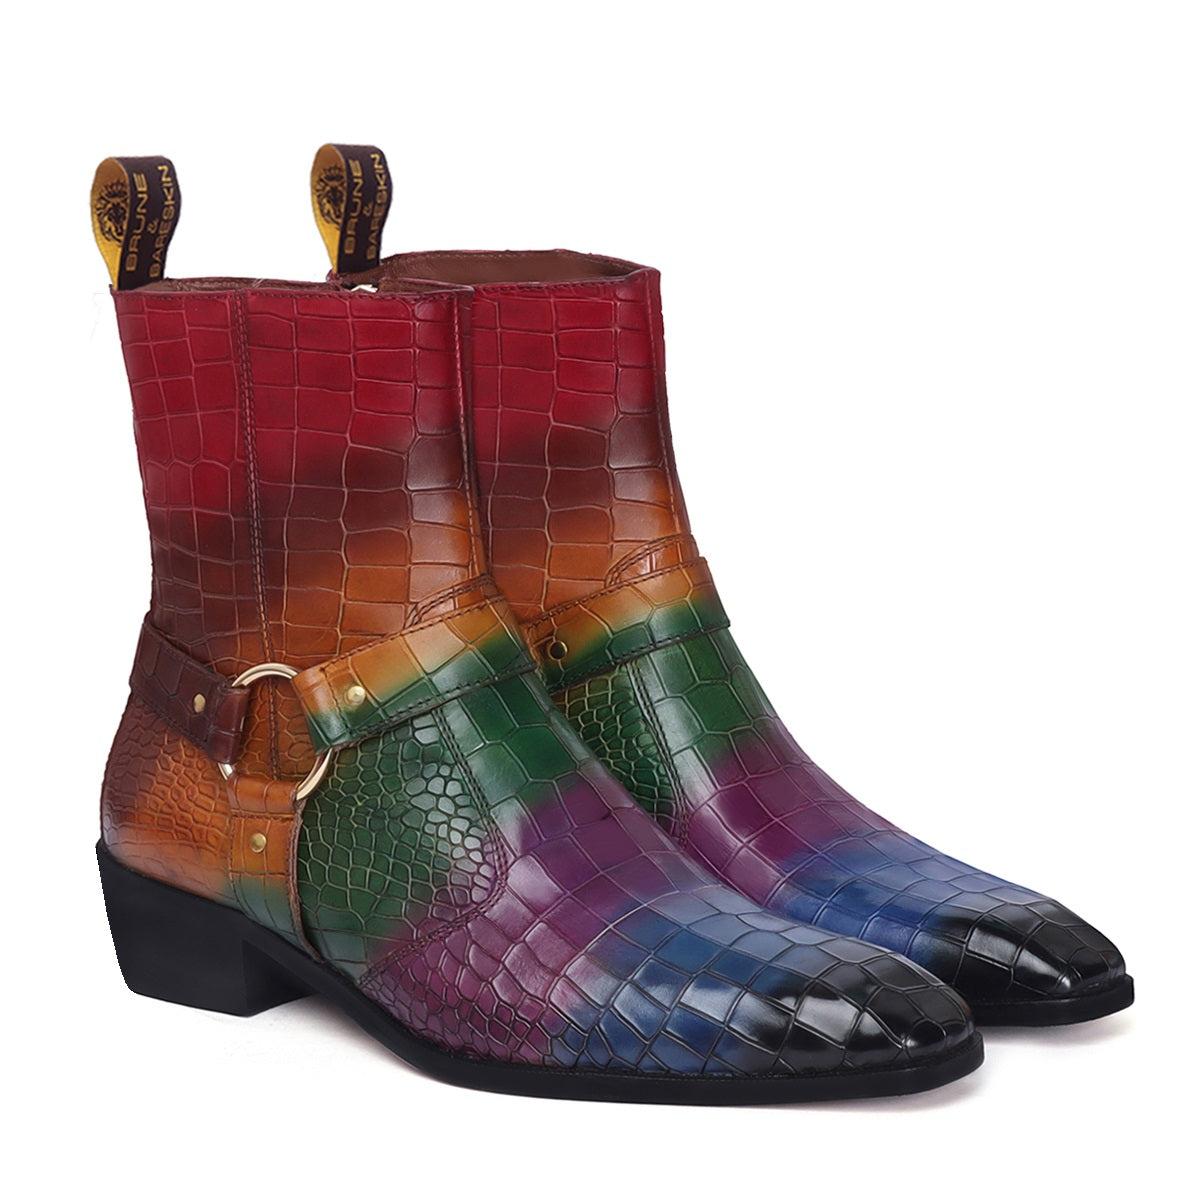 Multi-Colored Cuban Heel Boots in Croco Textured Leather with Stylish Strap